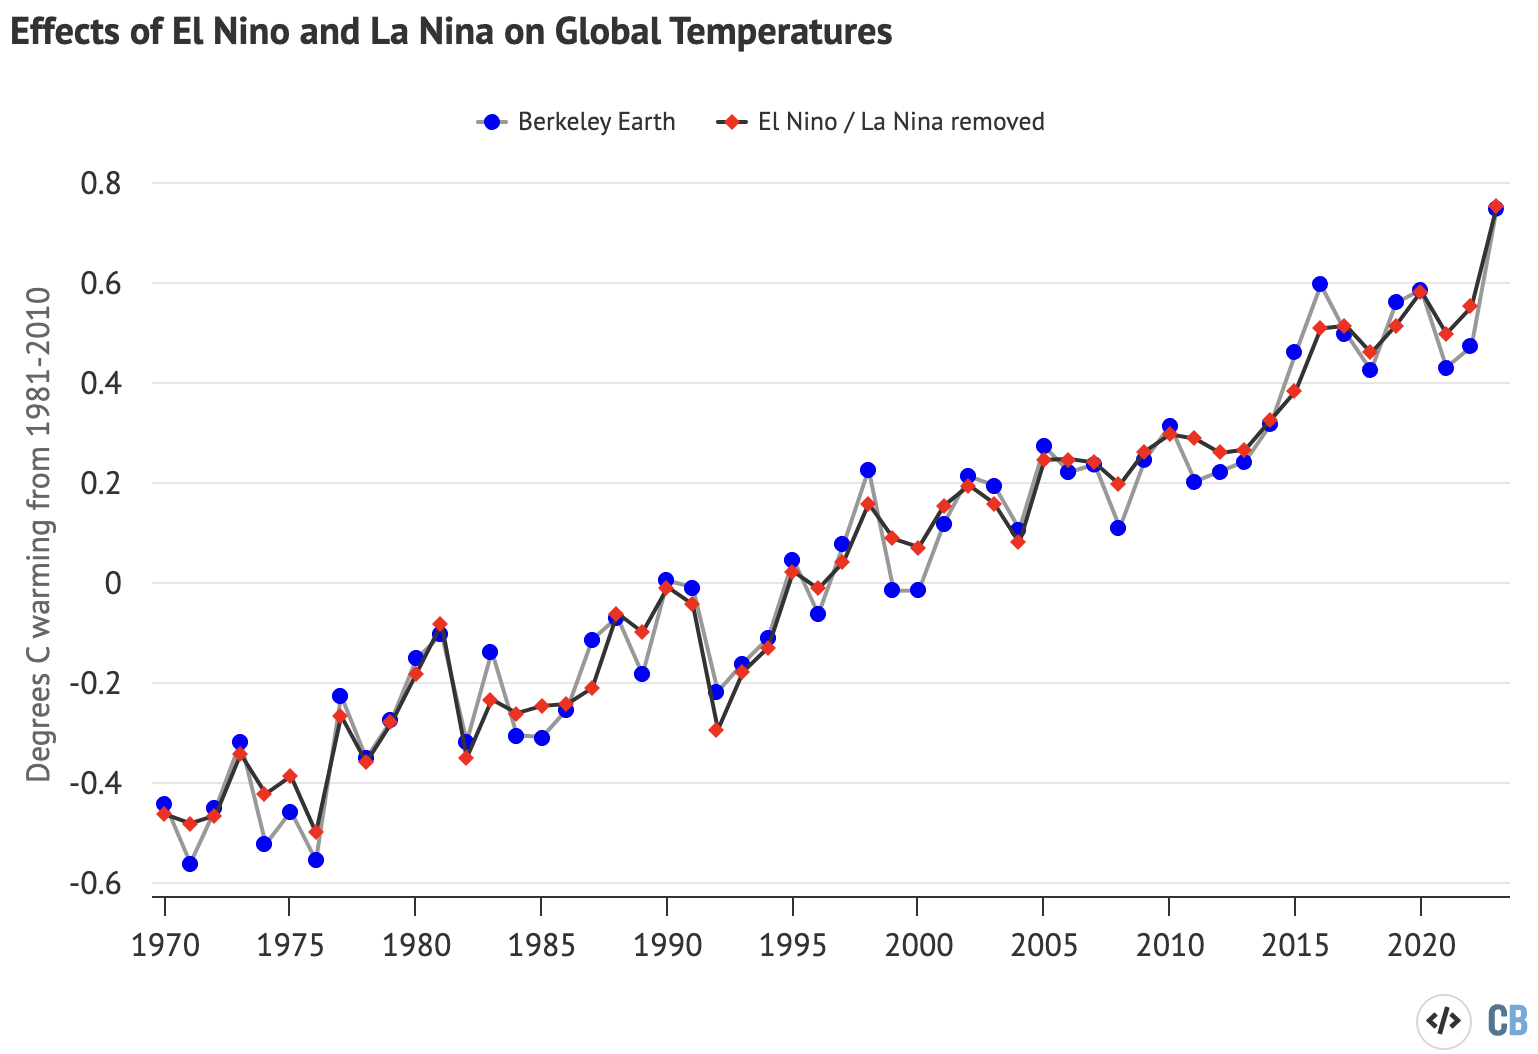 Annual global average surface temperatures from Berkeley Earth, as well as Carbon Brief’s estimate of global temperatures with the effect of El Niño and La Niña (ENSO) events removed using the Foster and Rahmstorf (2011) approach. Figures are shown relative to a 1981-2010 baseline. Chart by Carbon Brief.